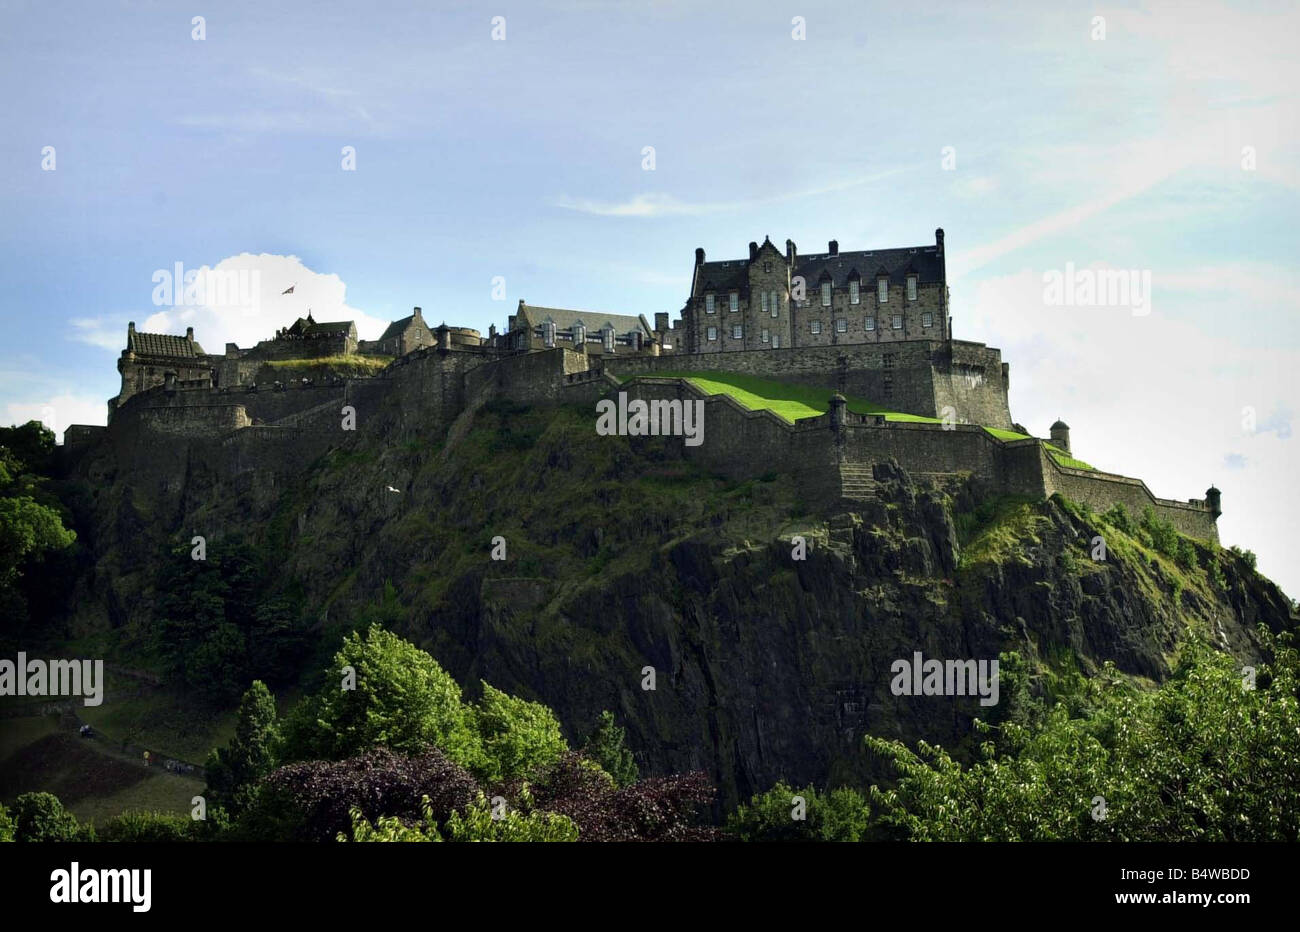 General view of Edinburgh Castle 20 08 01 Daily Record No Fee Stock Photo